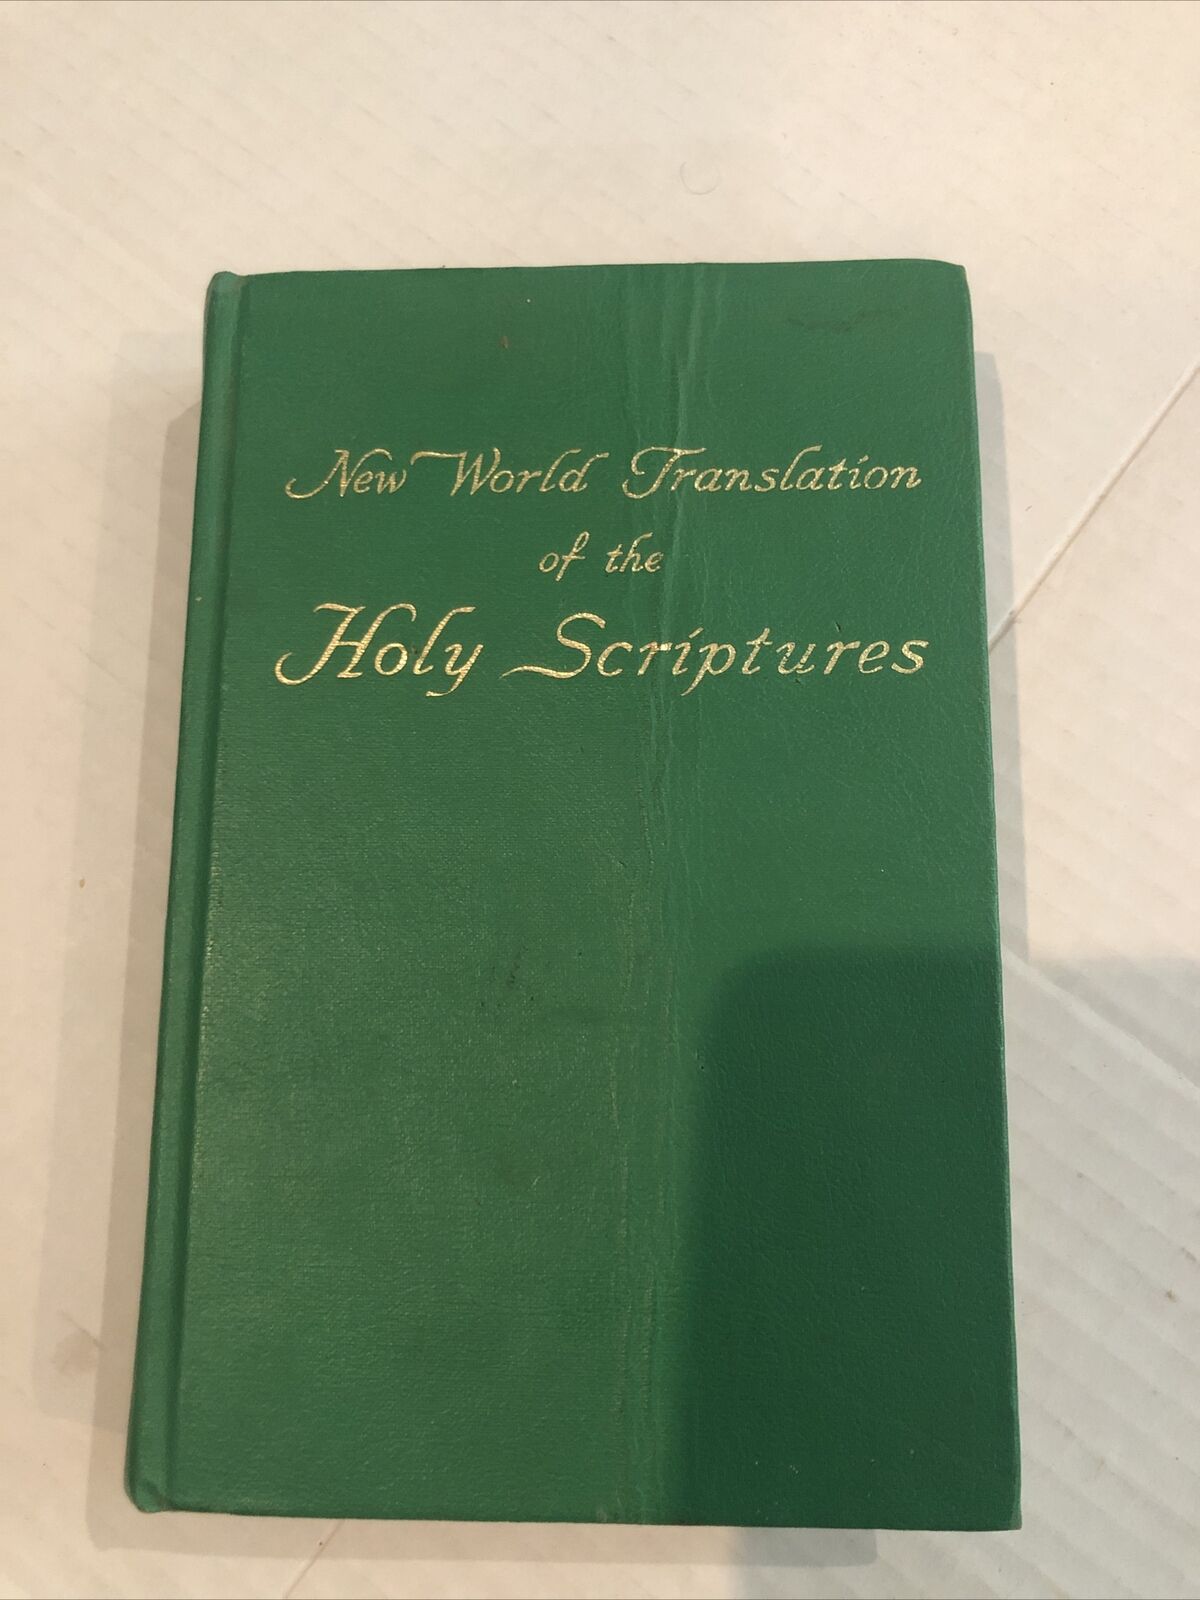 Vintage 1961 New World translation of the holy scriptures watch tower bible 